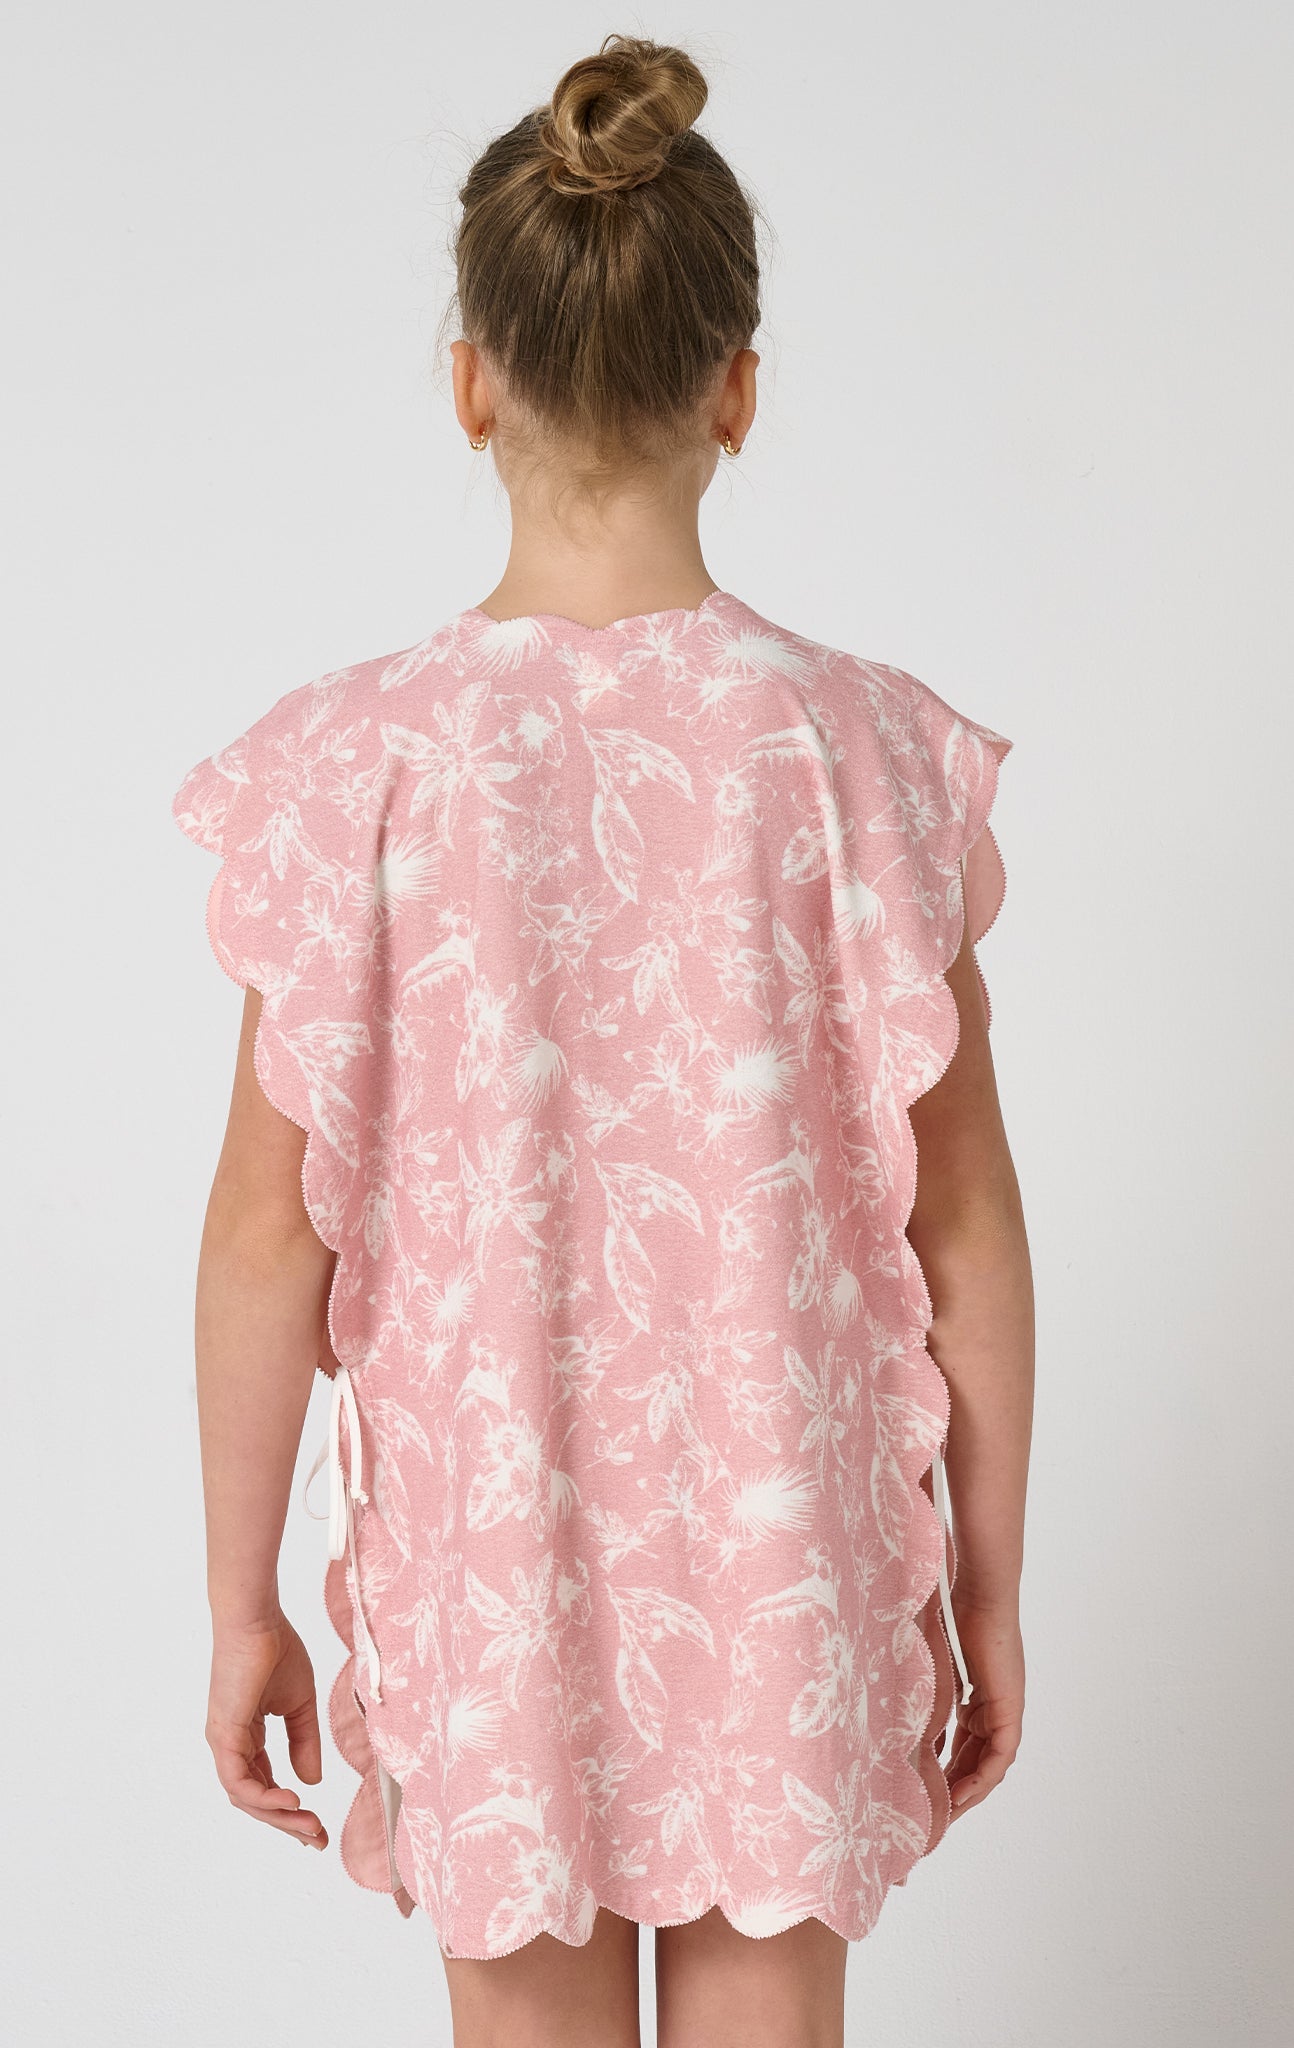 Bumby Poncho in Calm Floral Print MARYSIA